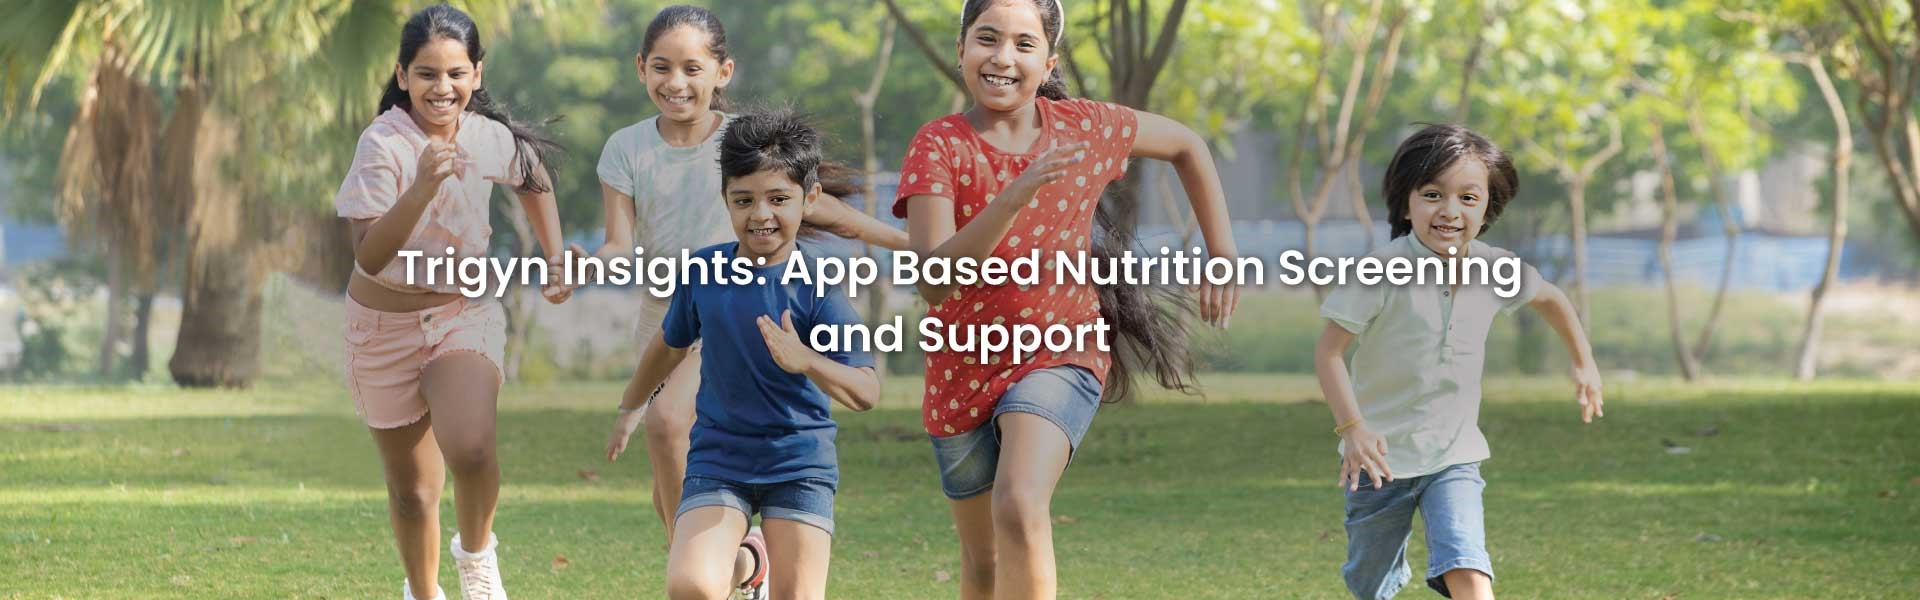 App for Nutrition Screening and Support